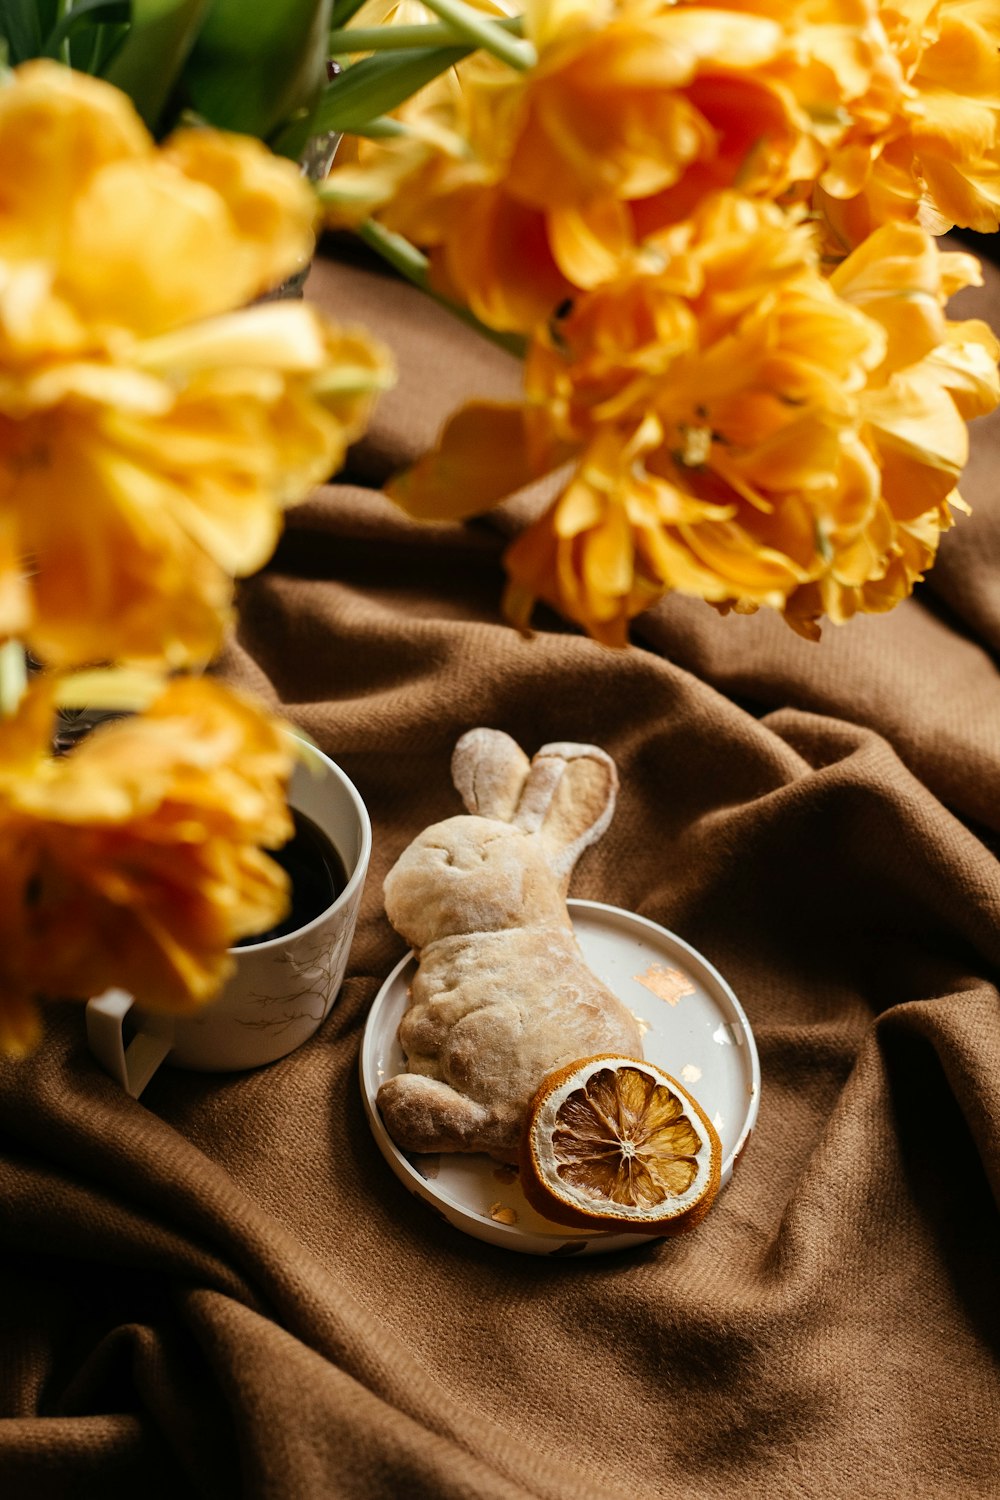 a stuffed rabbit sitting on a plate next to some flowers